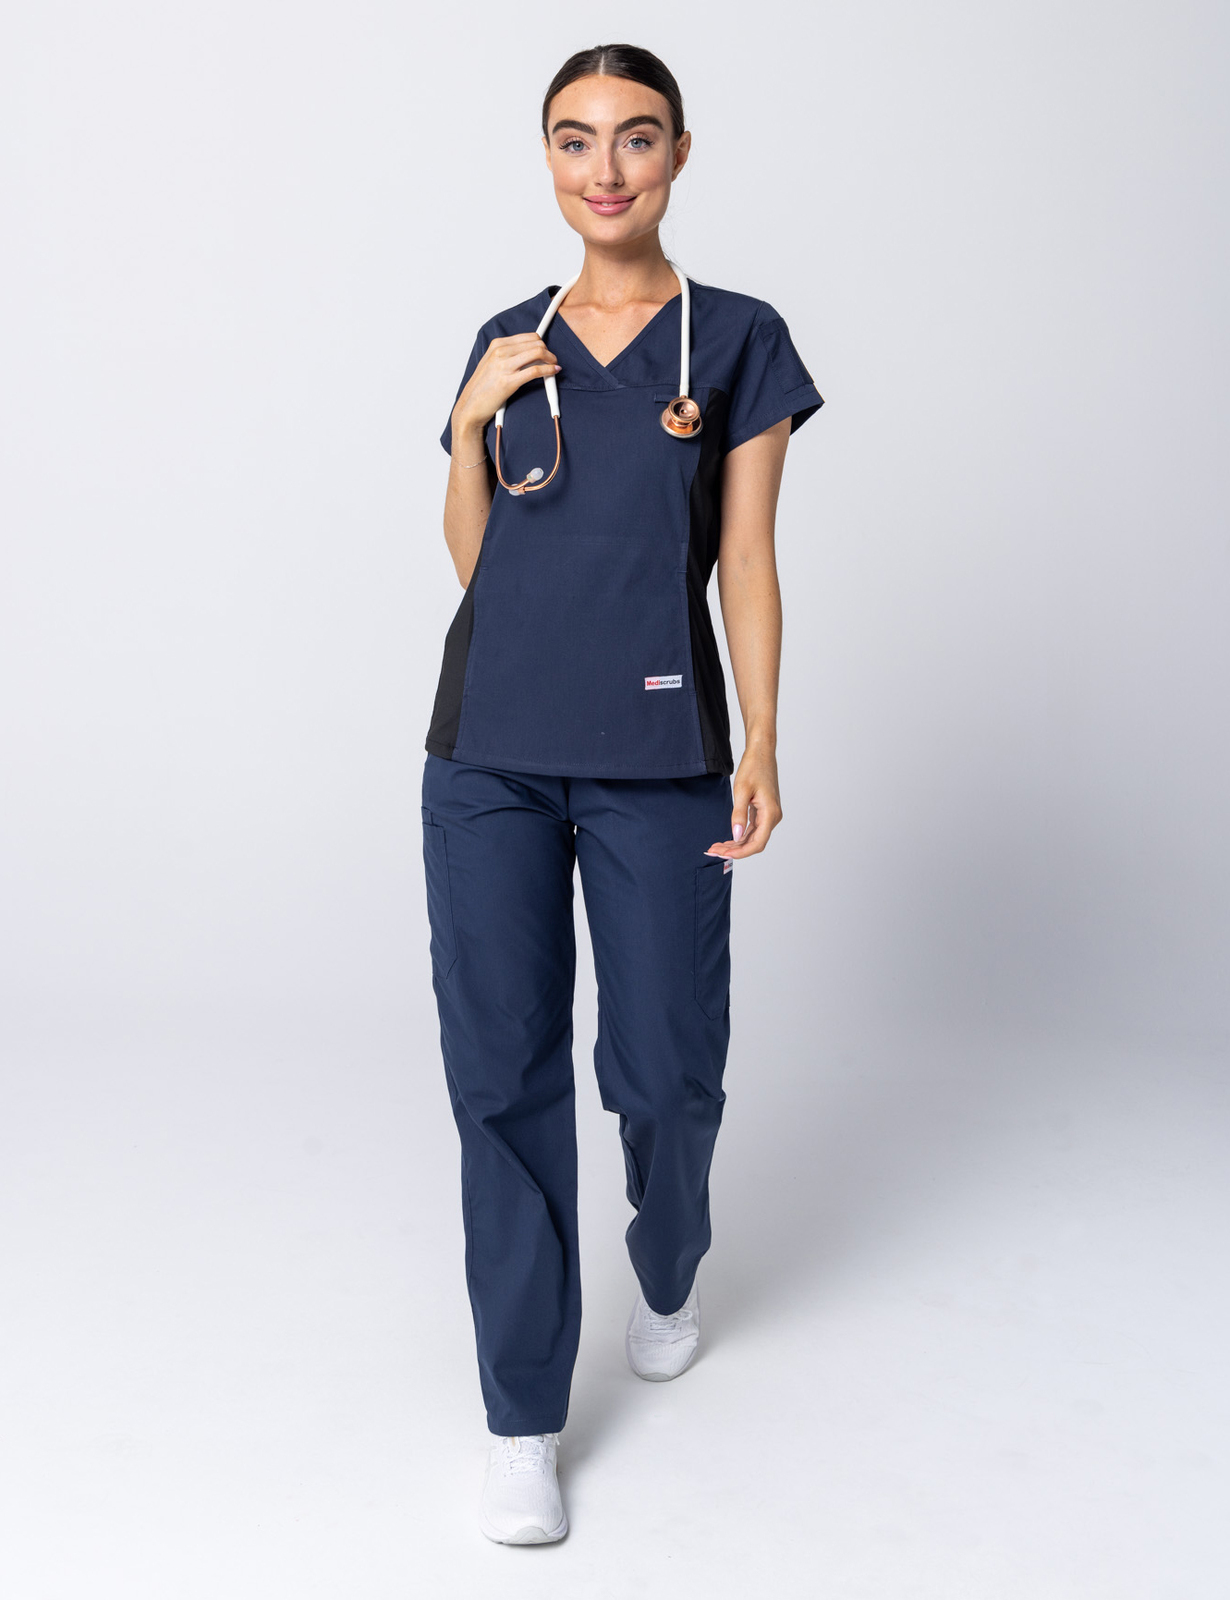 Women's Fit Solid Scrub Top With Spandex Panel - Navy - Medium